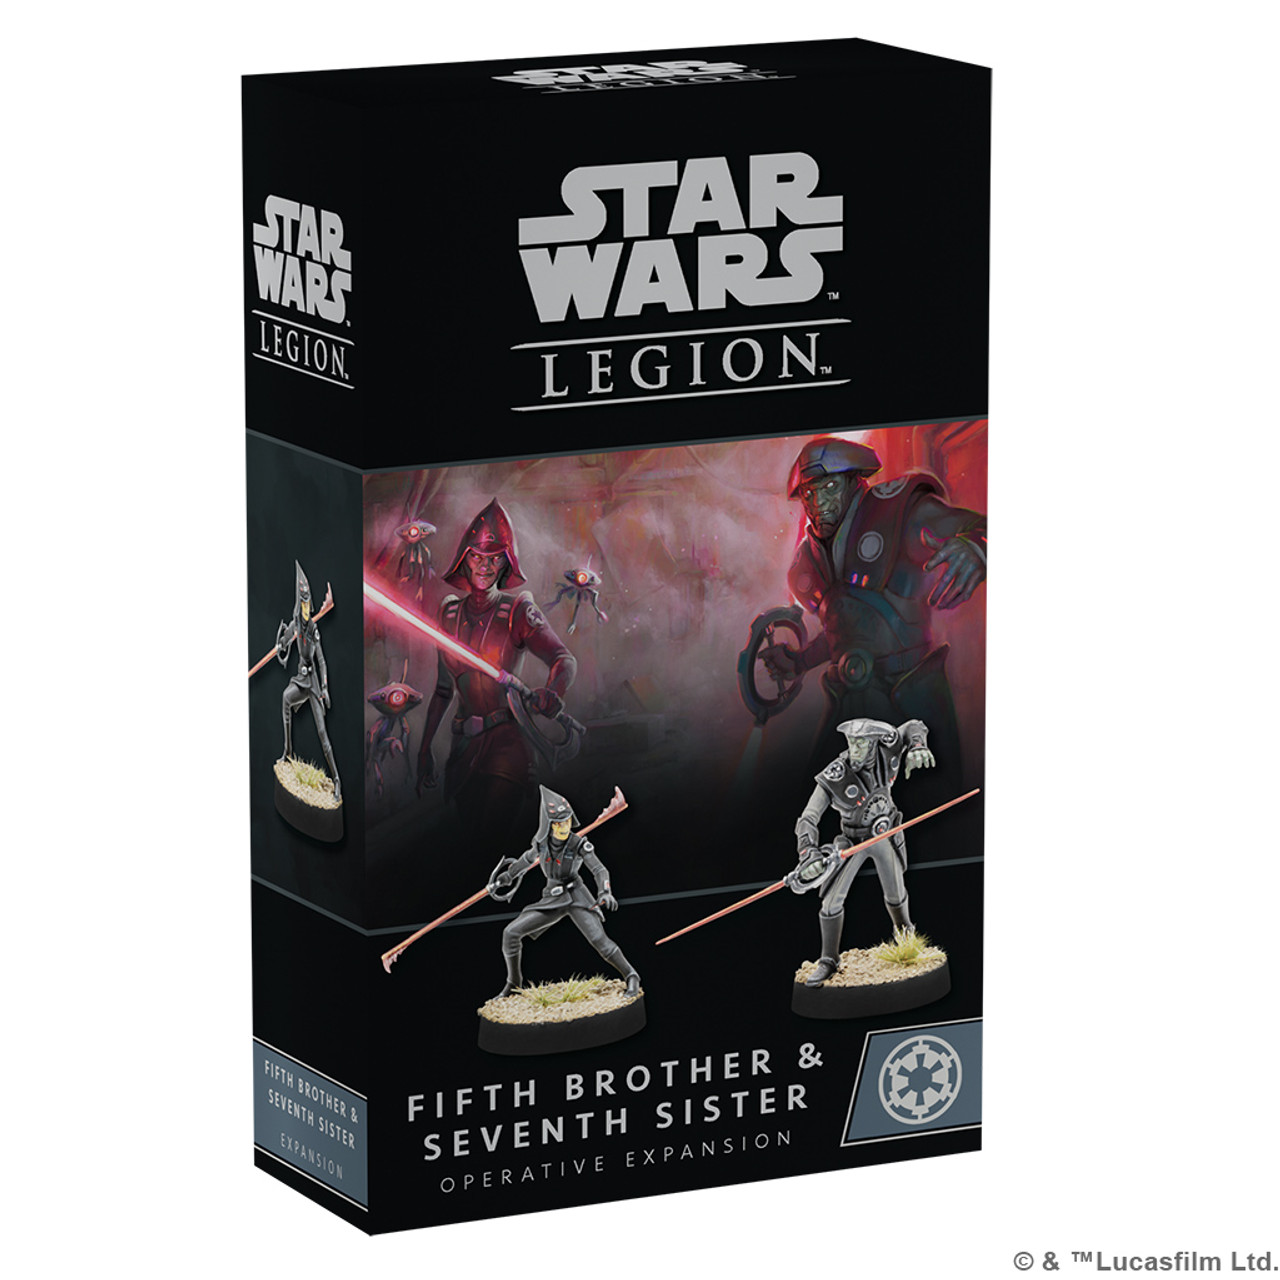 Star Wars: Legion- Fifth Brother and Seventh Sister Operative Expansion